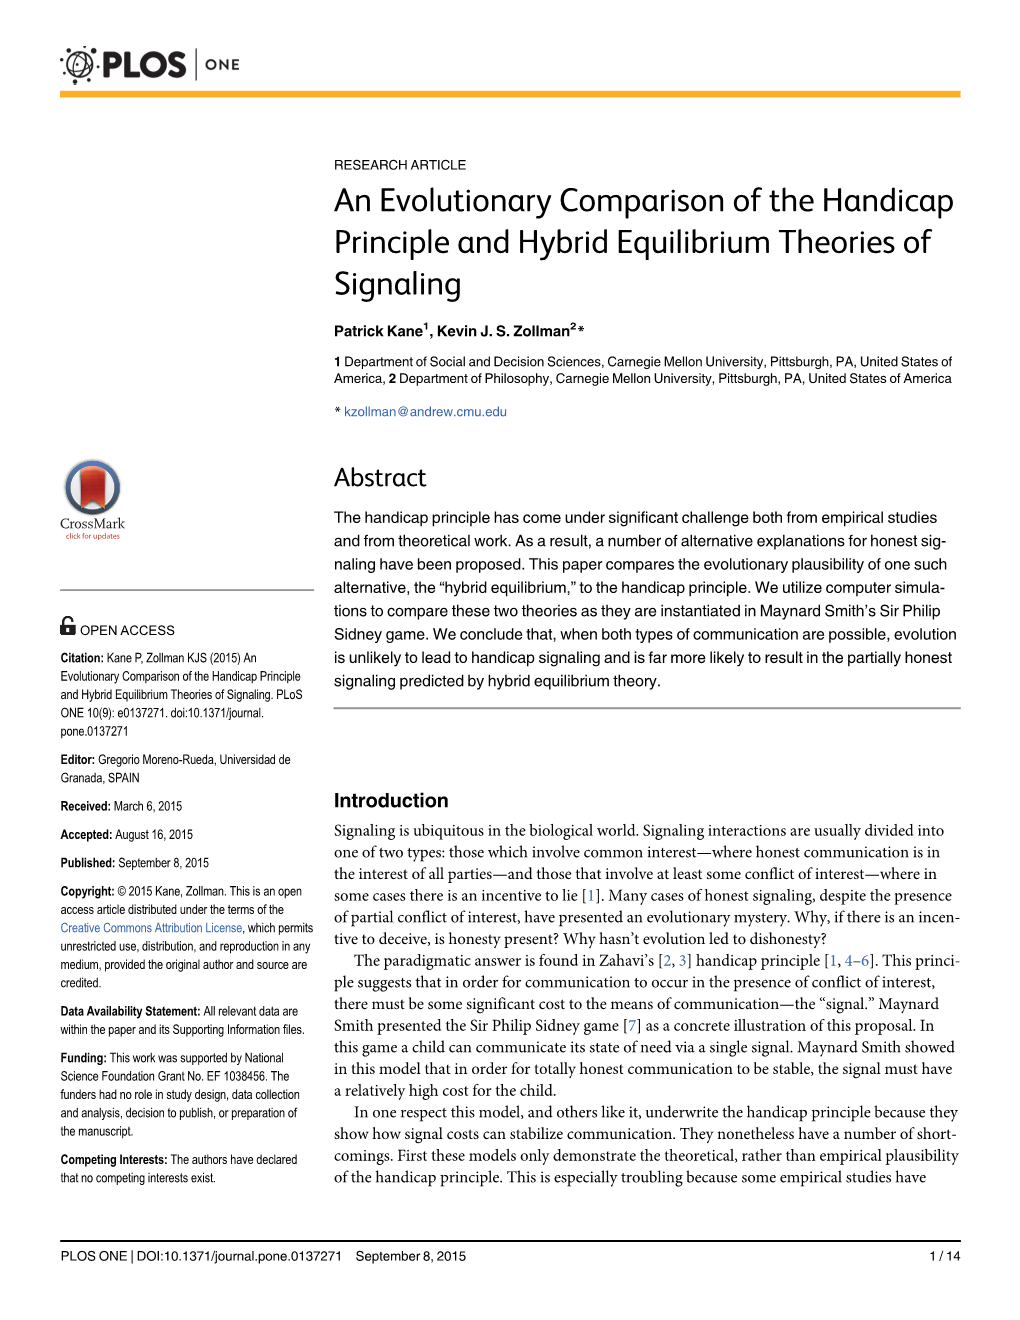 An Evolutionary Comparison of the Handicap Principle and Hybrid Equilibrium Theories of Signaling